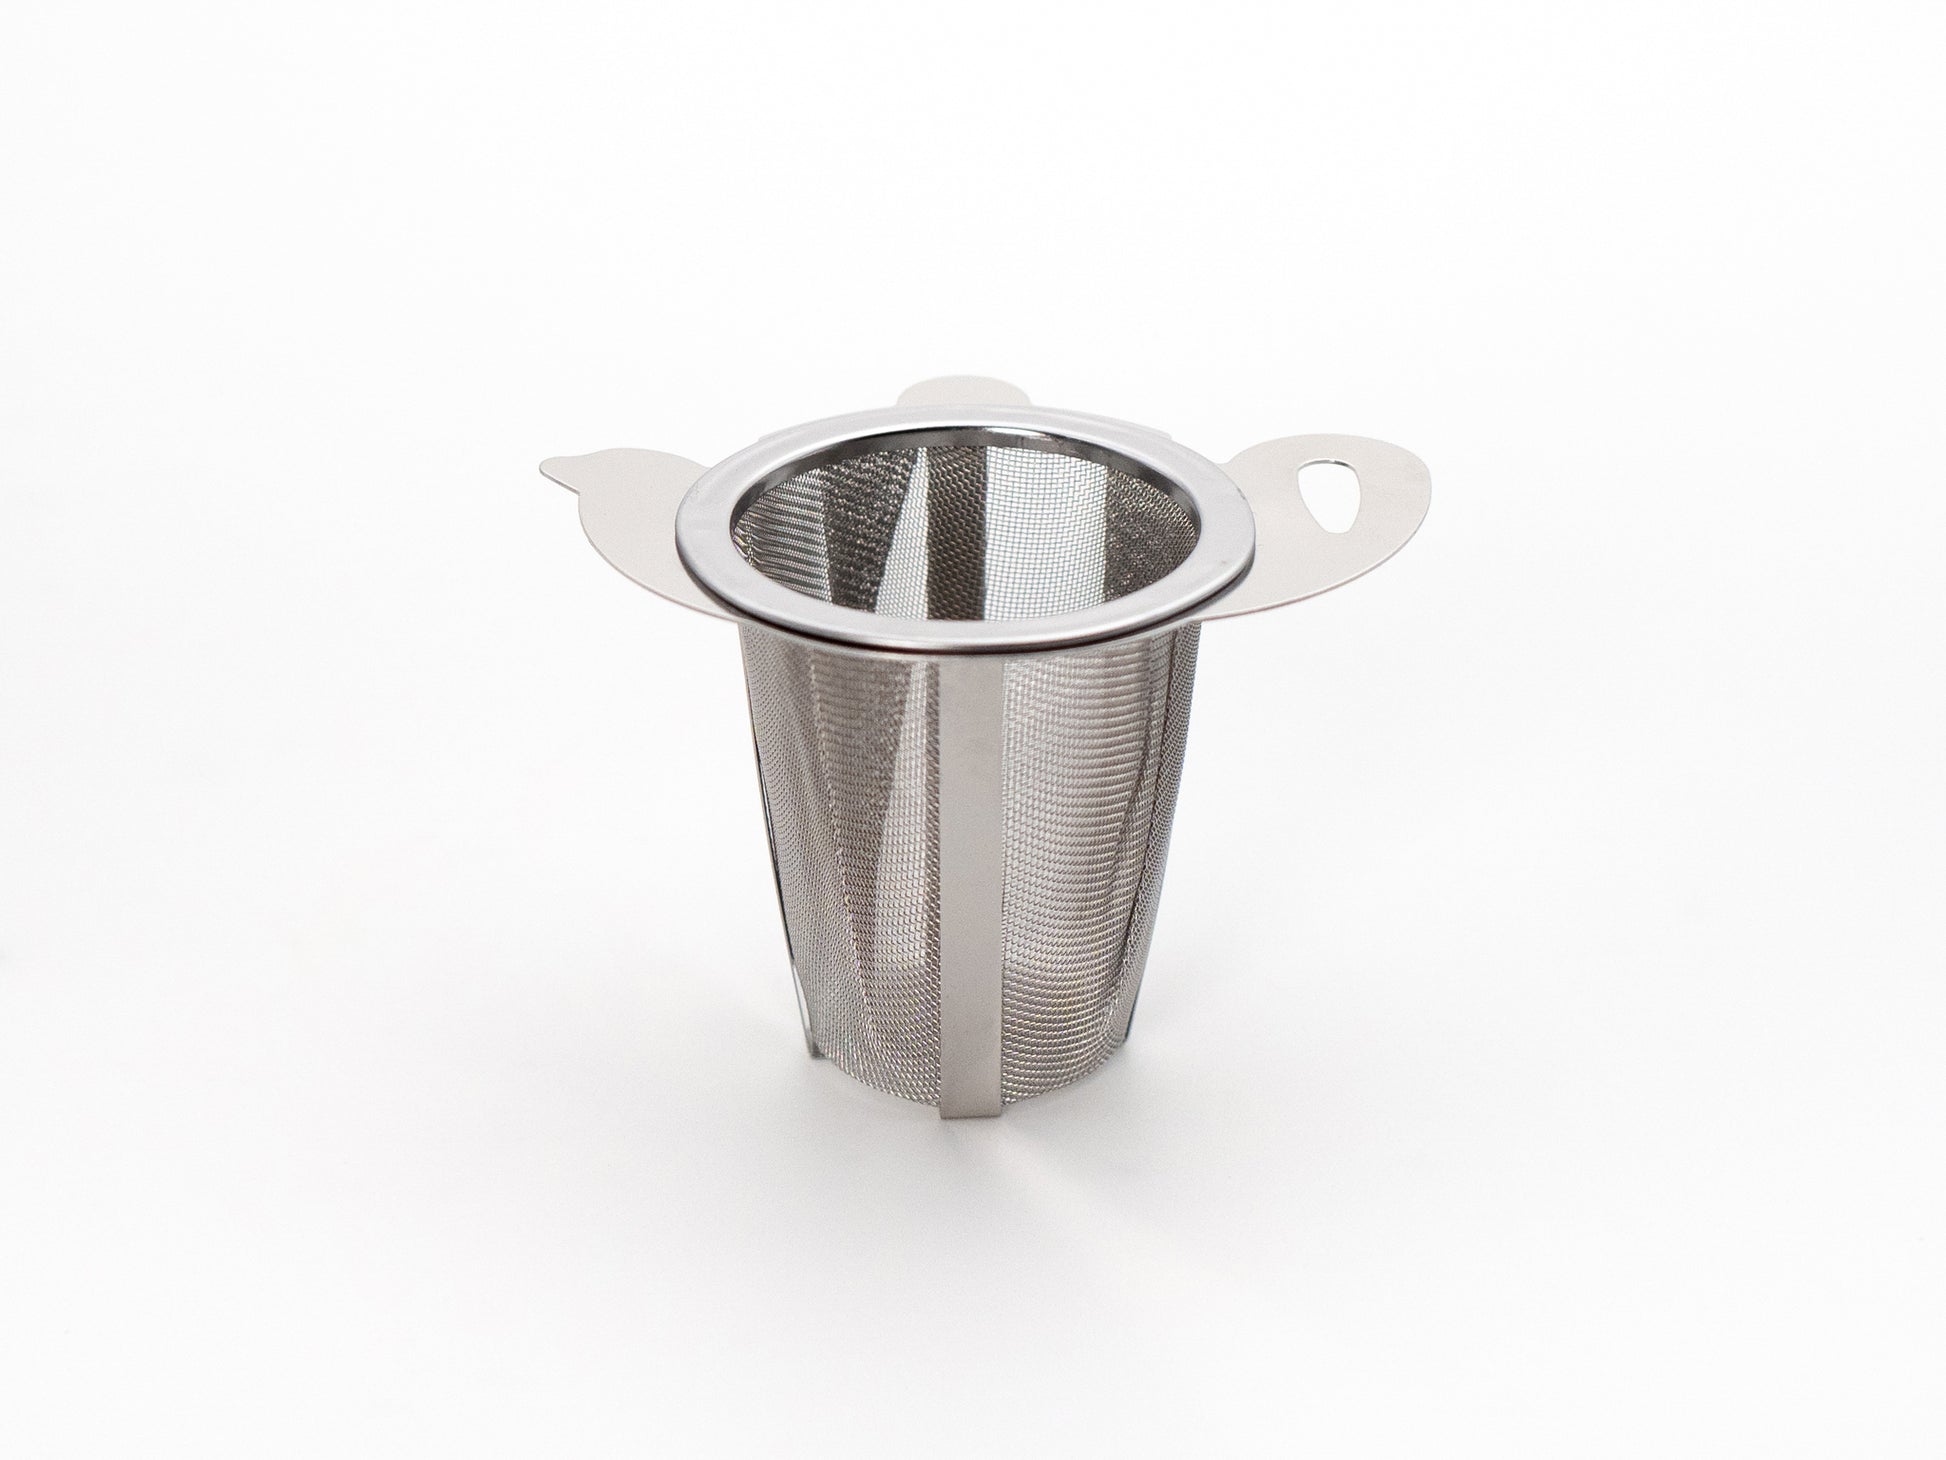 Tea pot shaped stainless steel infuser for mugs and cups